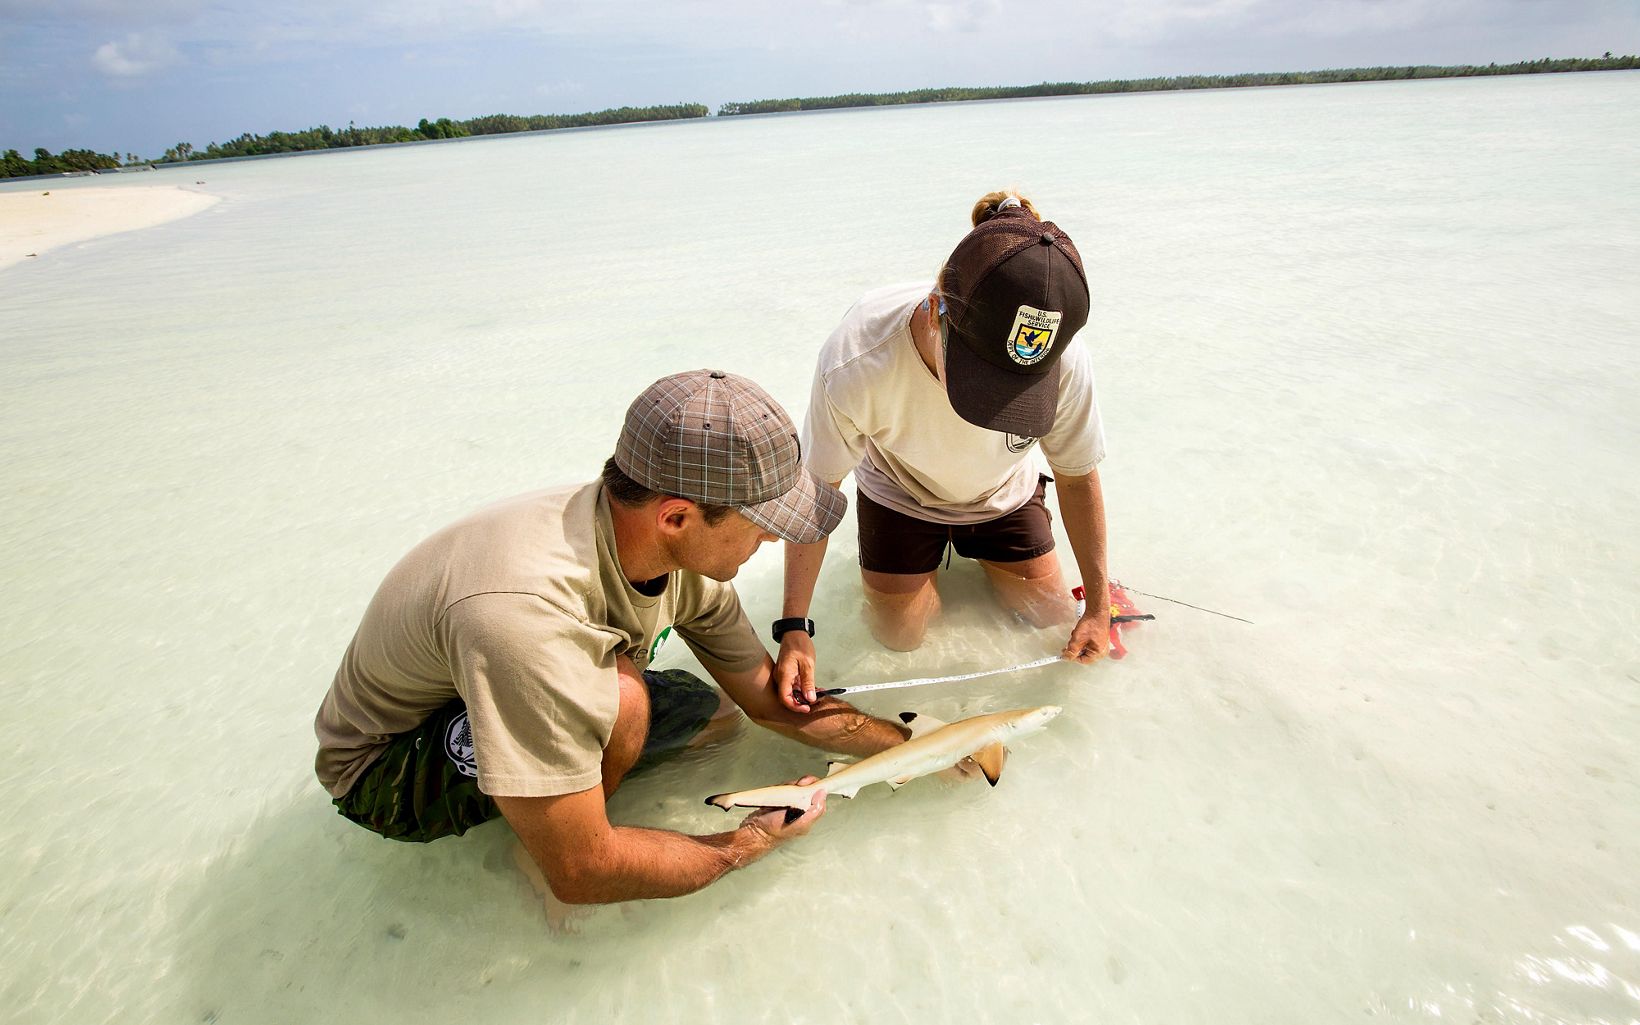 Conservancy staff Kydd Pollock and Amanda Meyer catch and measure a juvenile shark.